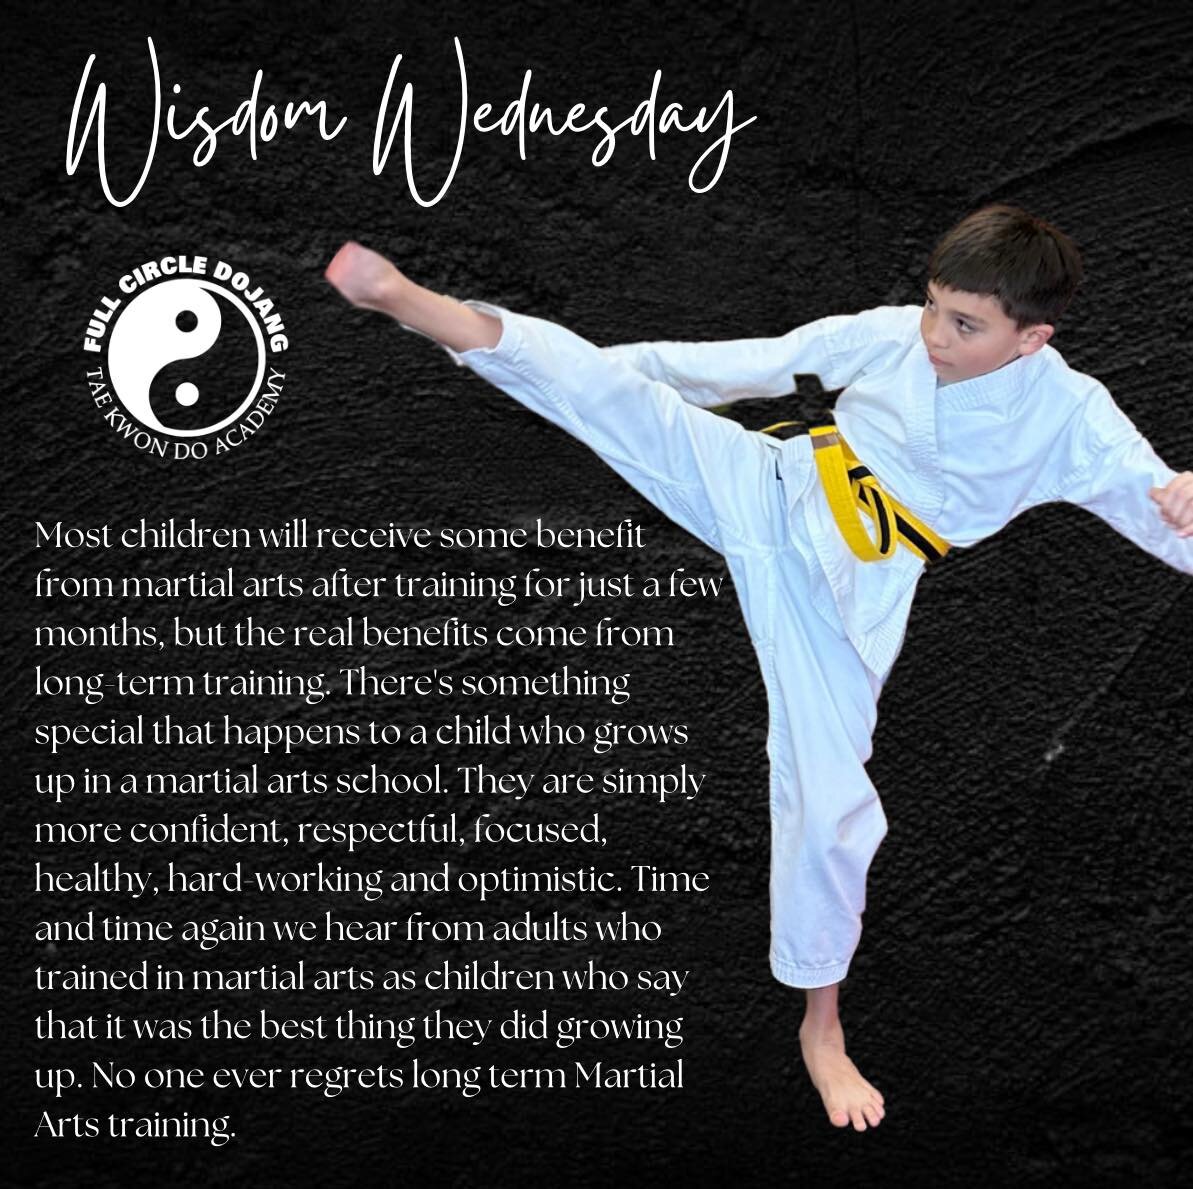 Most children will receive some benefit from martial arts after training for just a few months, but the real benefits come from long-term training. There's something special that happens to a child who grows up in a martial arts school. They are simp